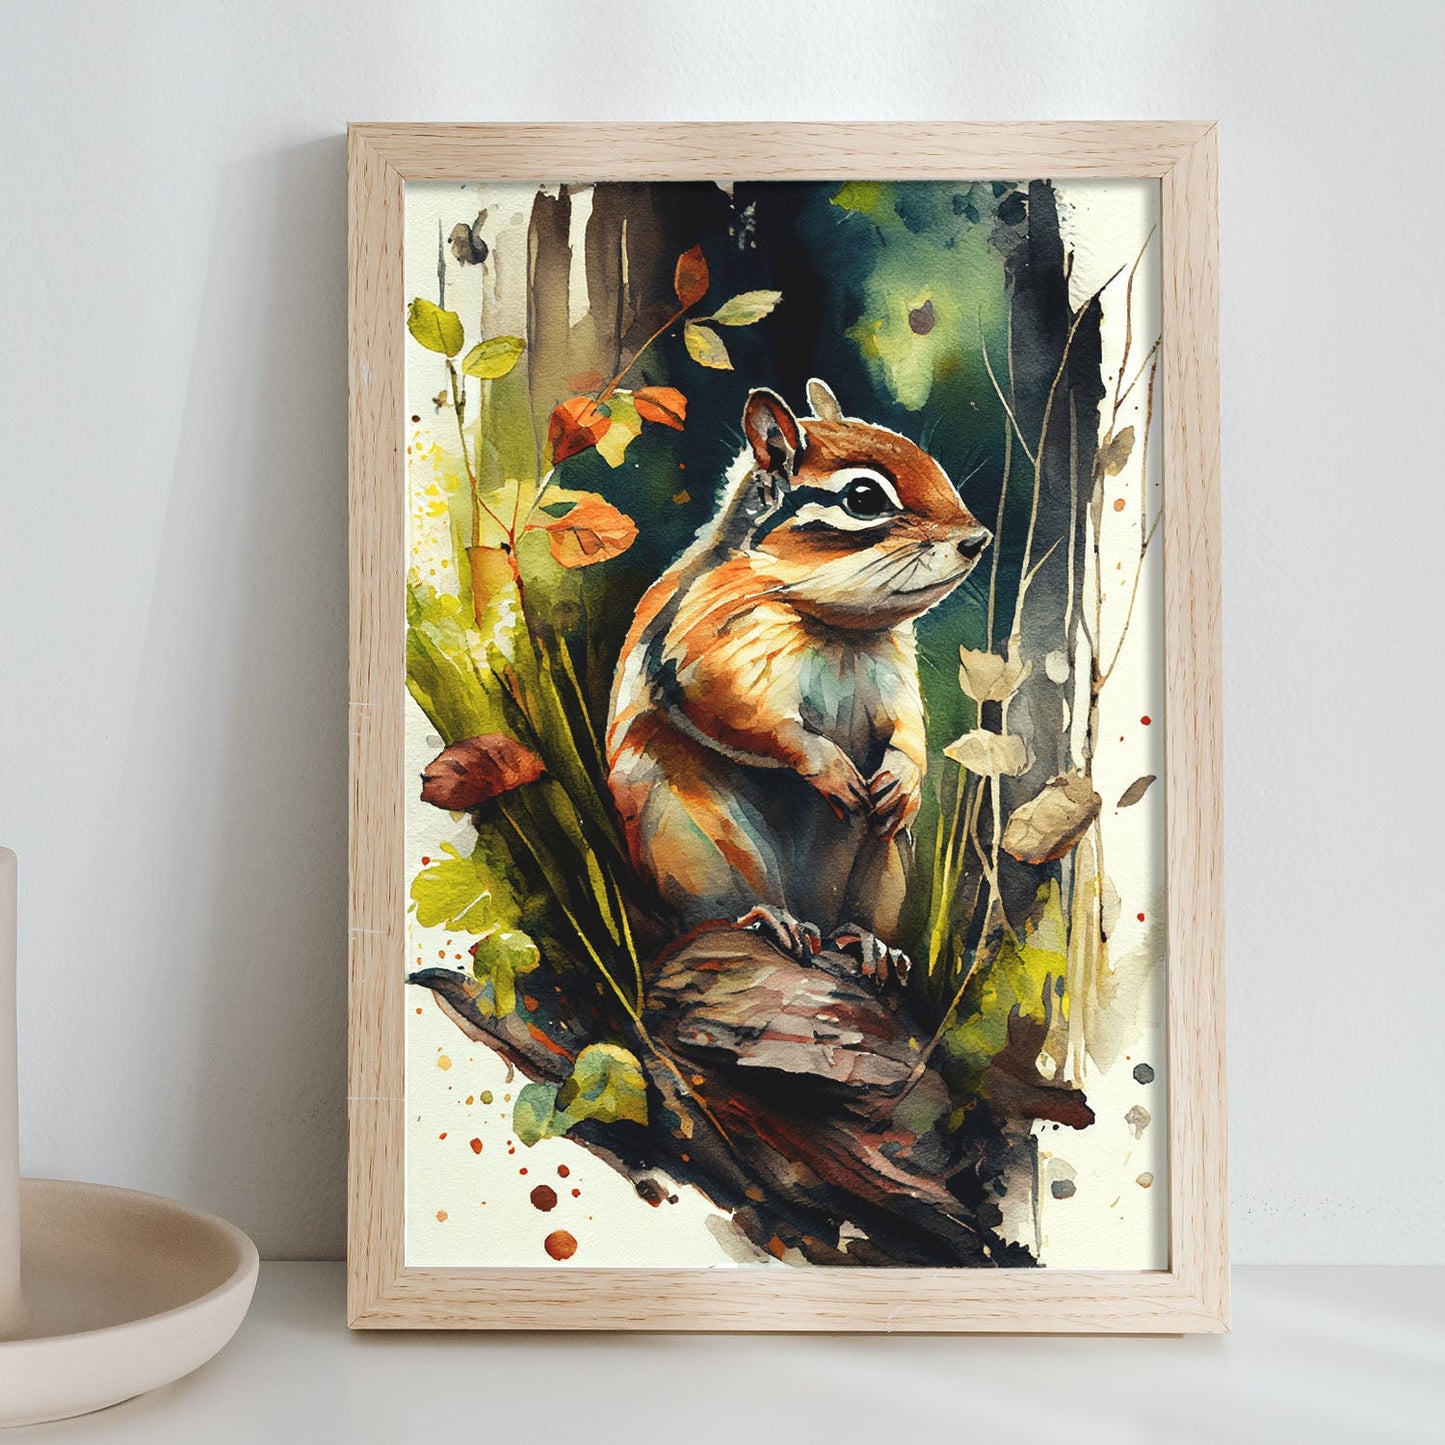 Nacnic Watercolor of Chipmunk in the forest. Aesthetic Wall Art Prints for Bedroom or Living Room Design.